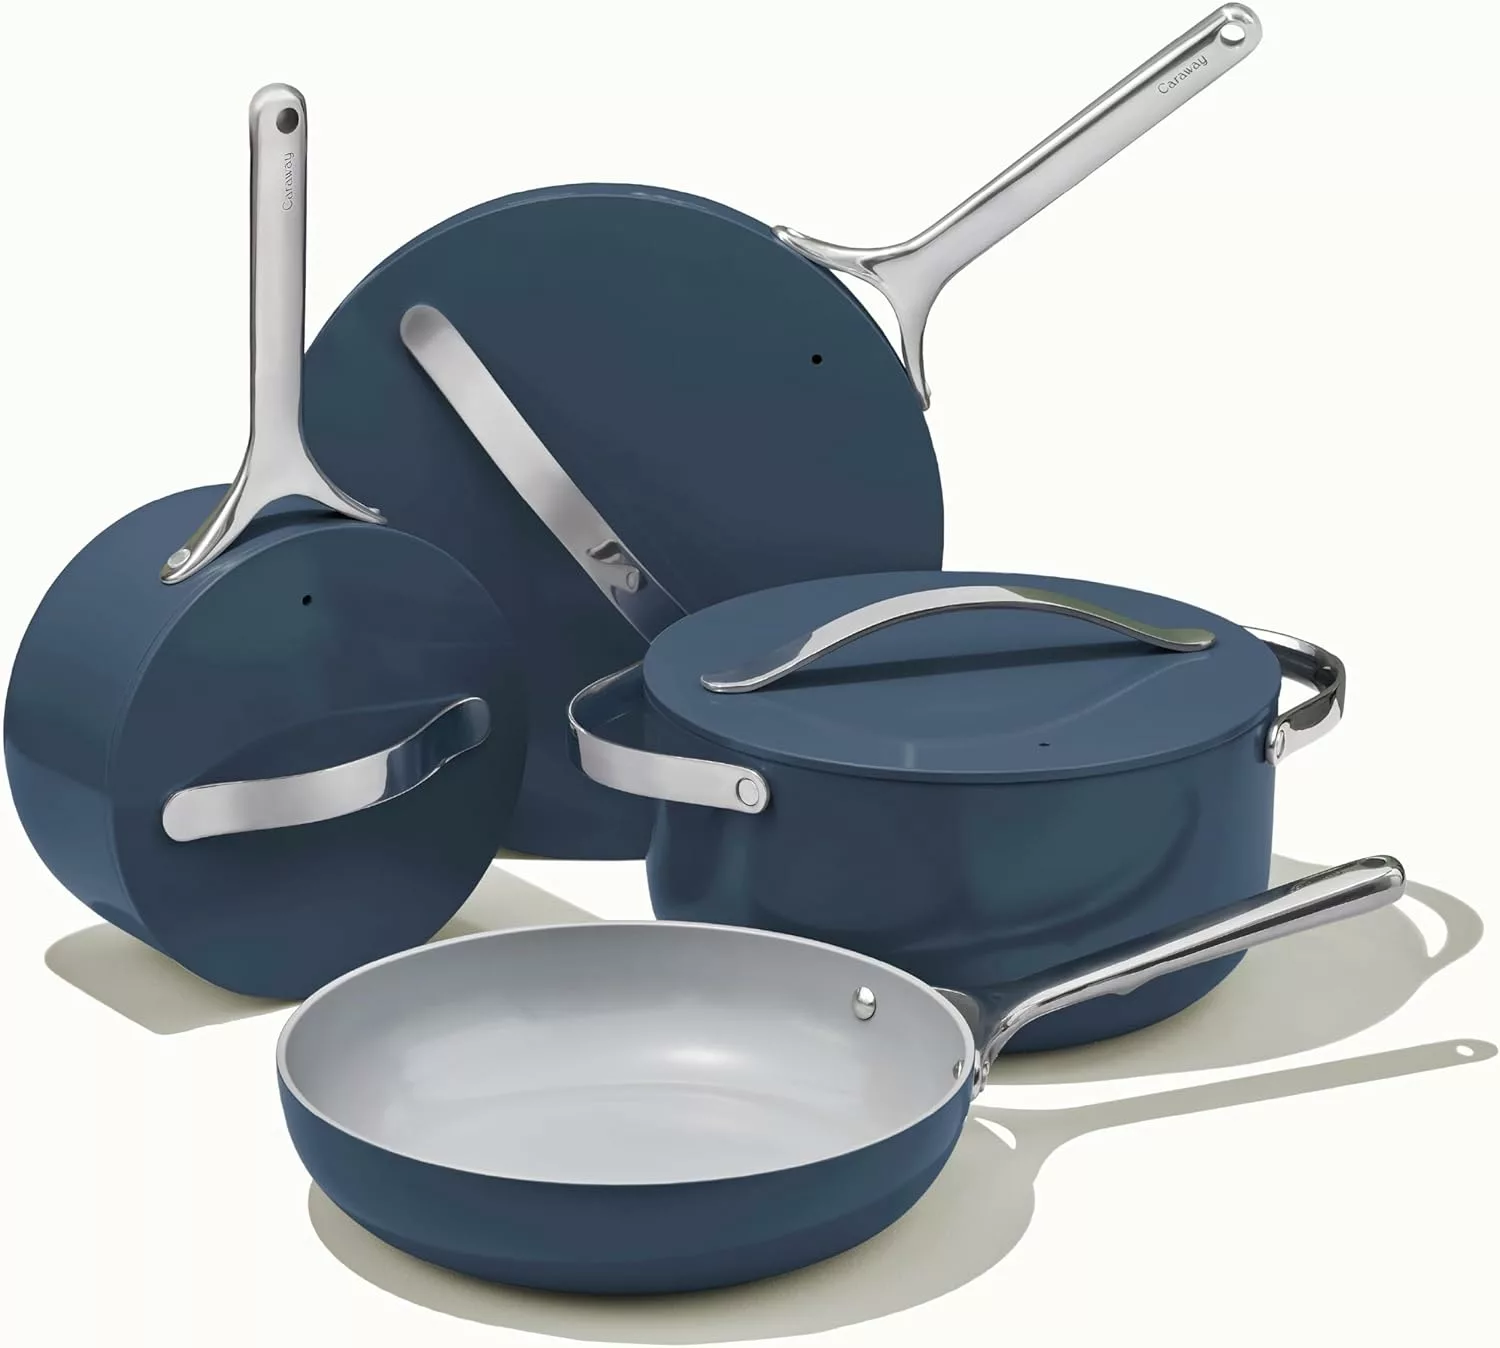 How Long Does Ceramic Cookware Last?